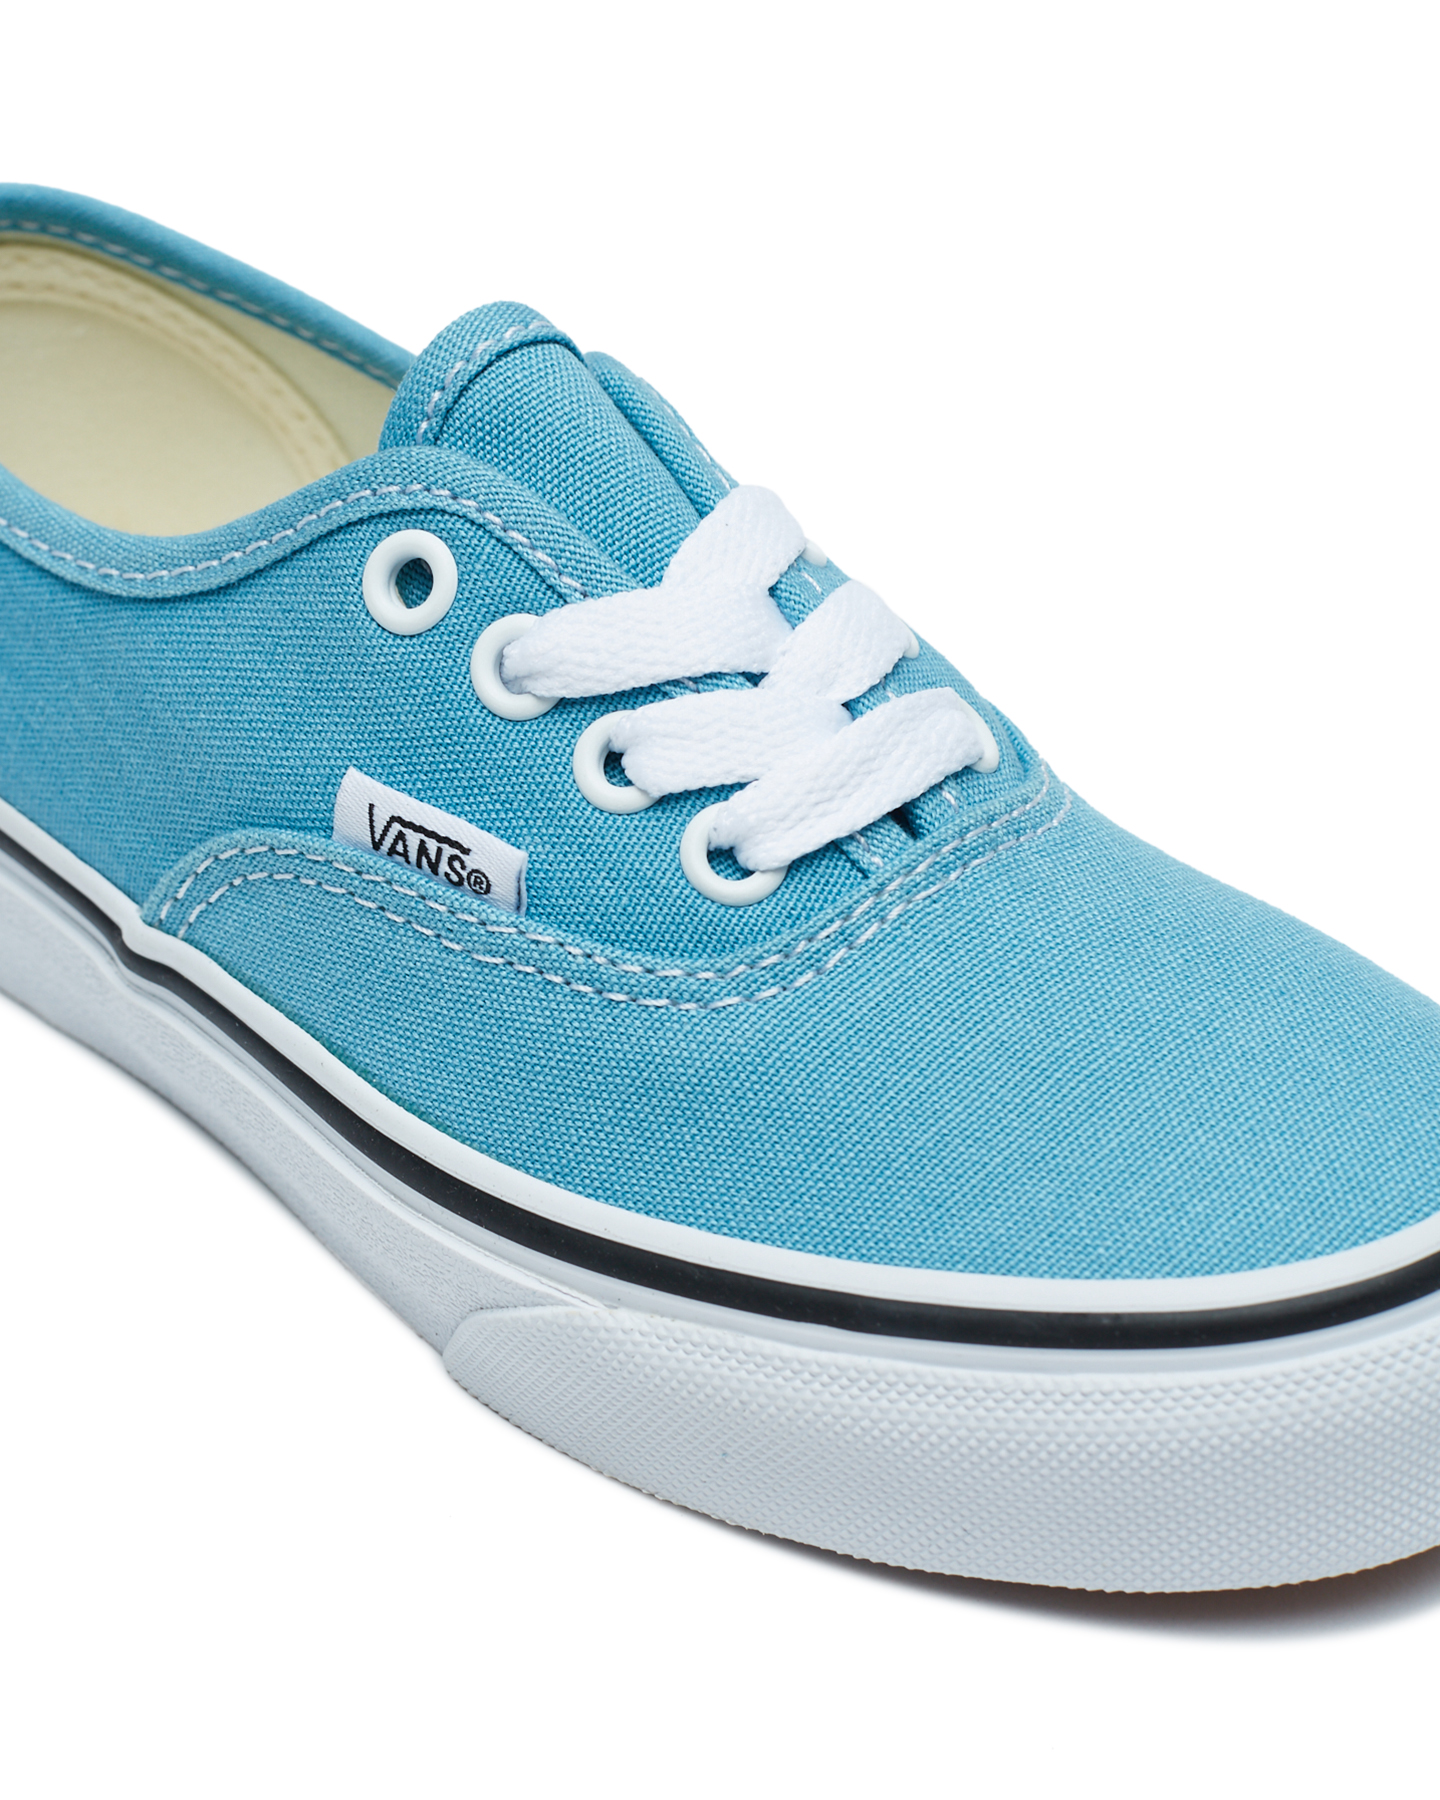 Vans Authentic Shoe - Youth - Blue White | SurfStitch